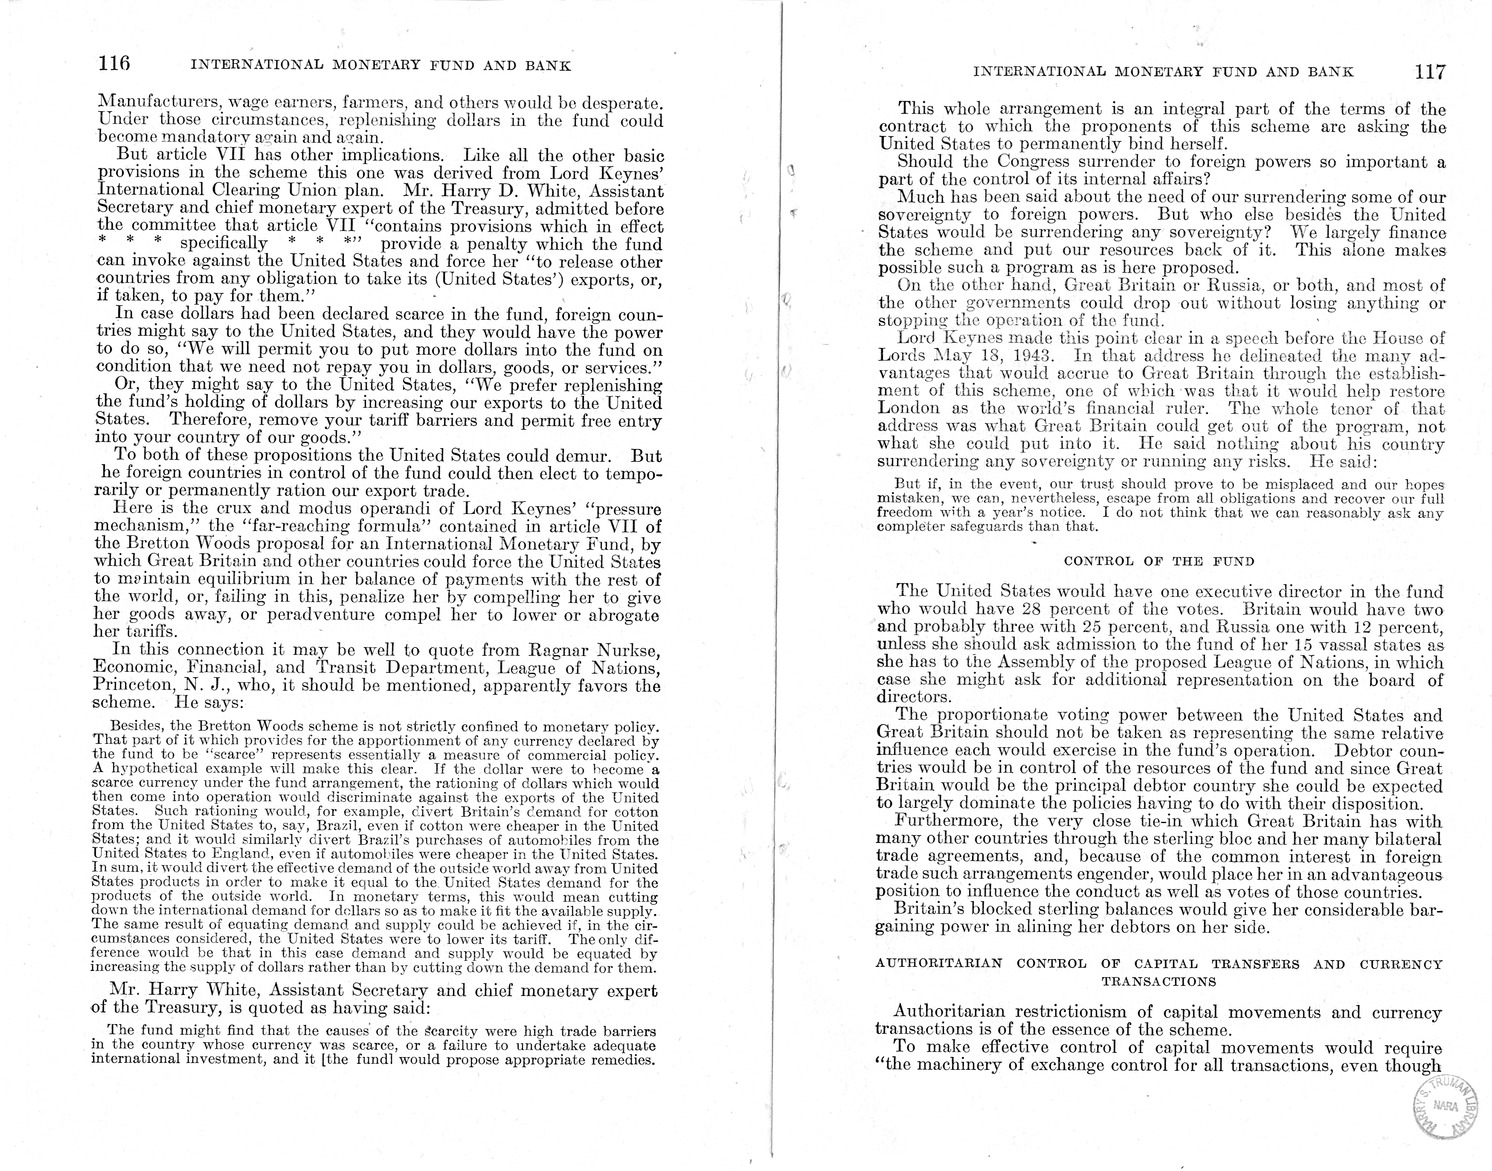 Memorandum from Harold D. Smith to M. C. Latta, H.R. 3314, to Provide for the Participation of the United States in the International Monetary Fund and the International Bank for Reconstruction and Development, with Attachments